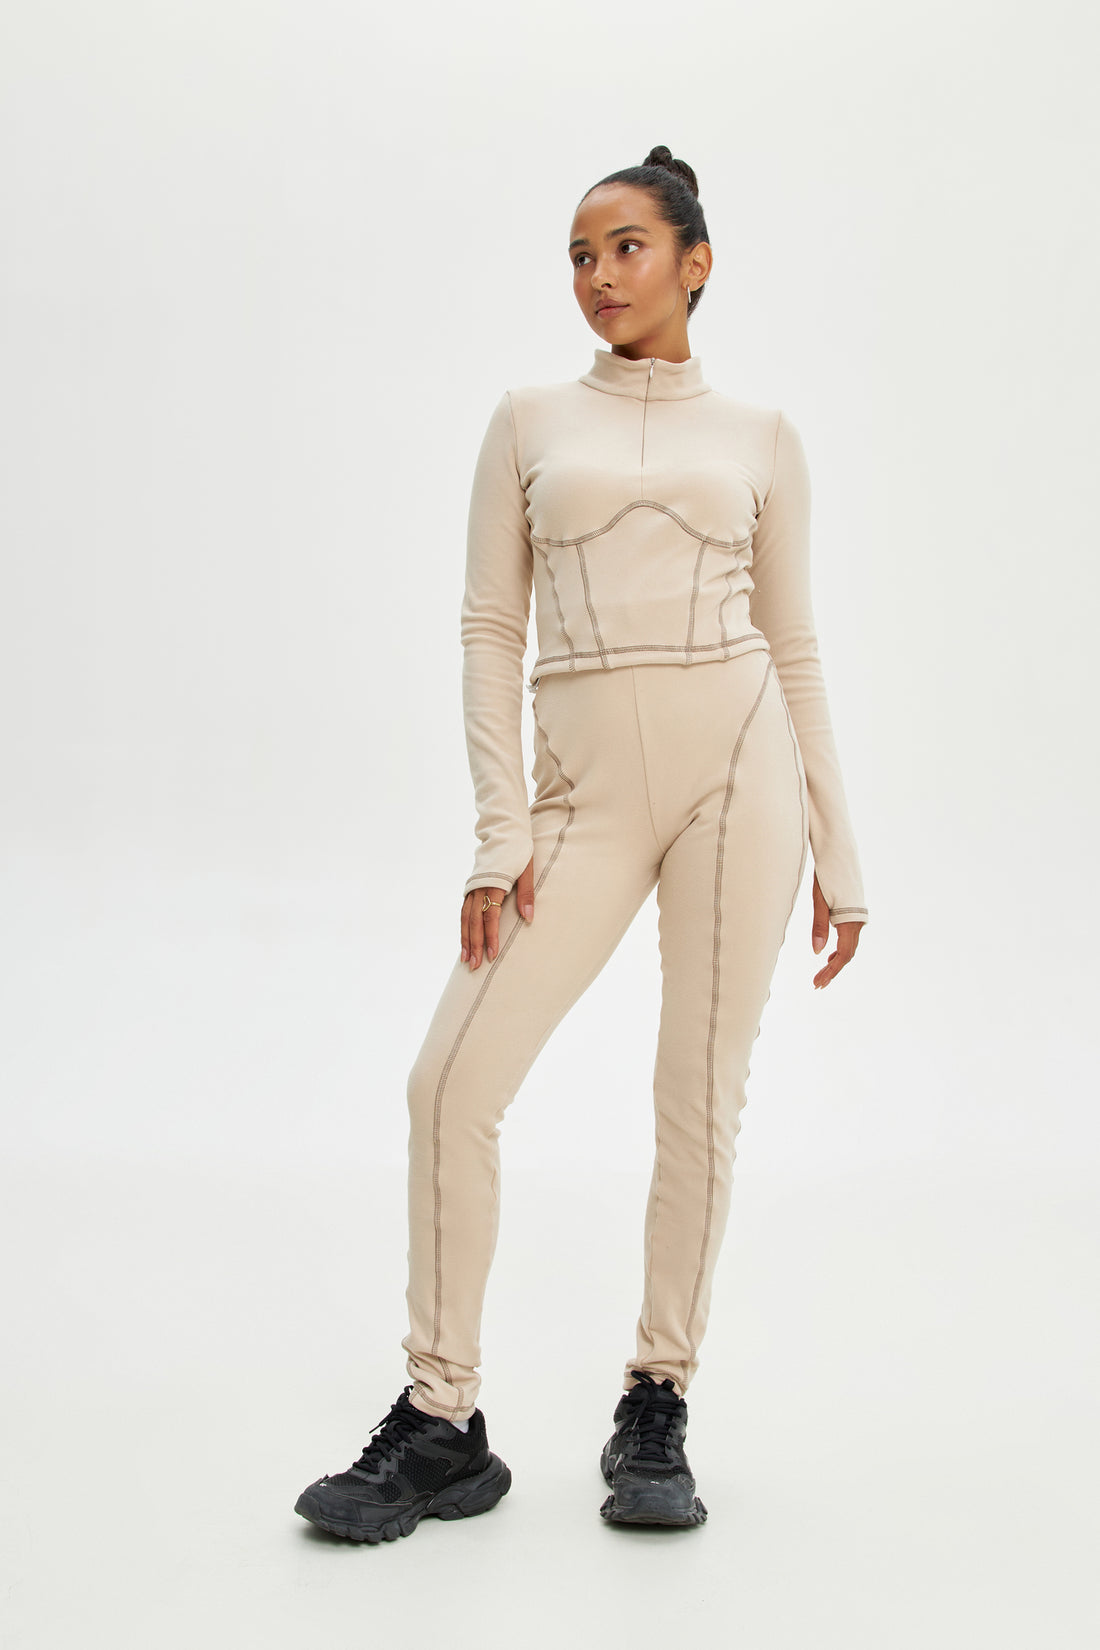 Womens base layer clothing - Beige two piece set long johns - Womens thermal tops